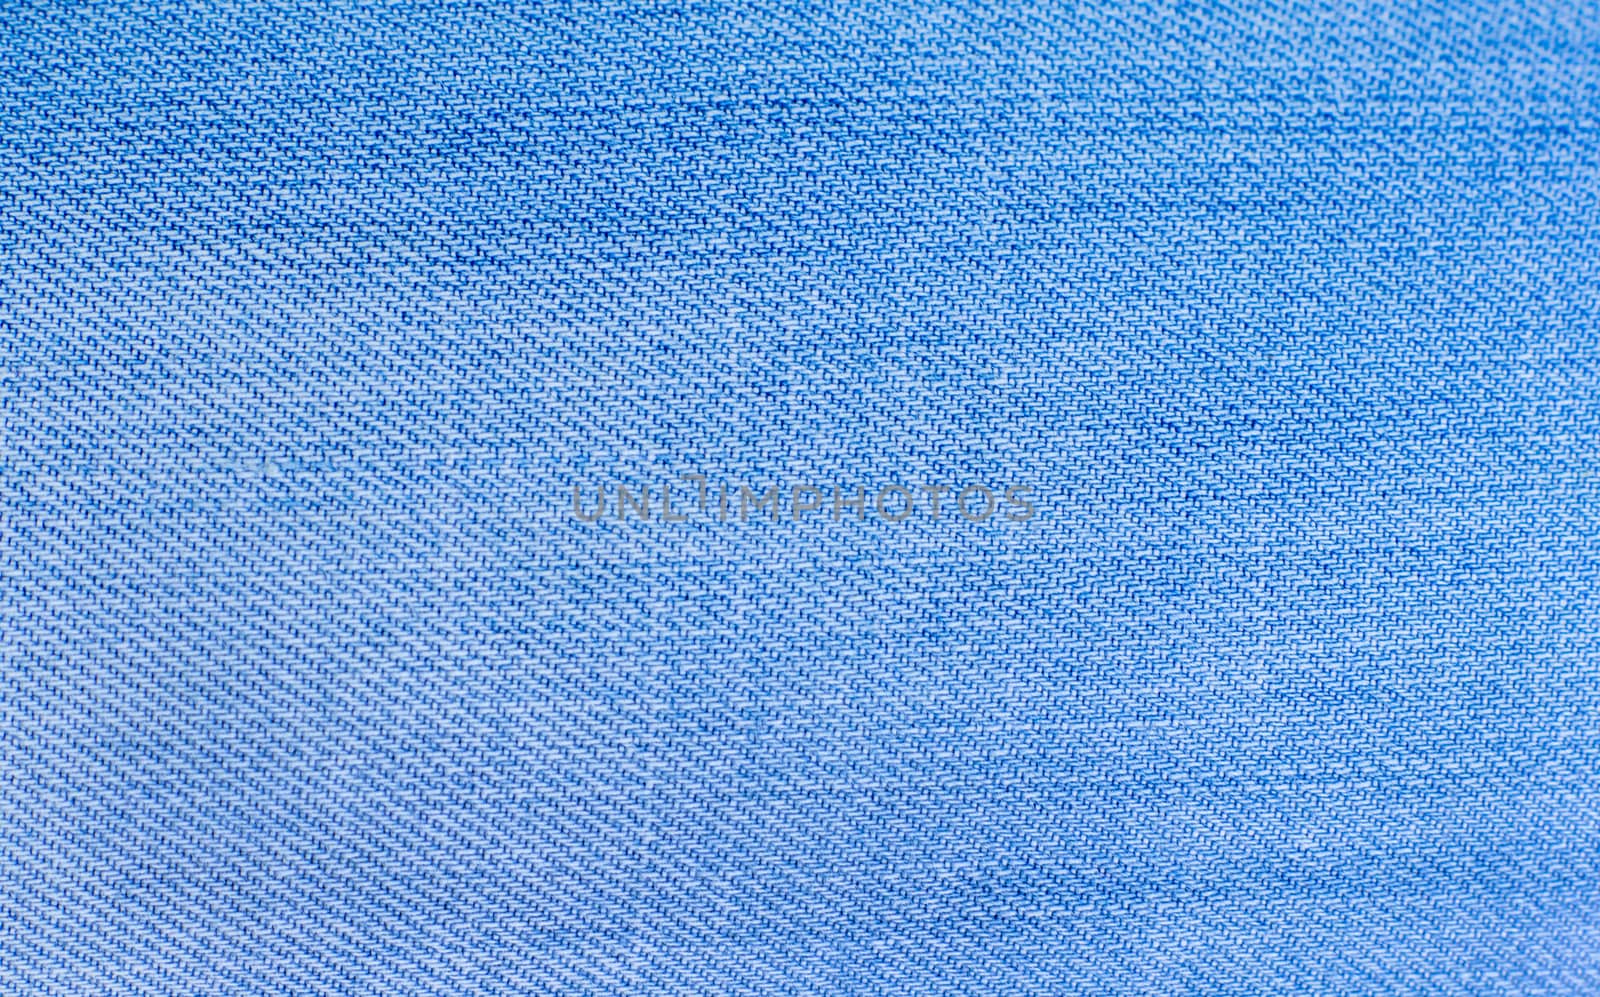 Texture of blue jeans textile close up. For your commercial and editorial use.